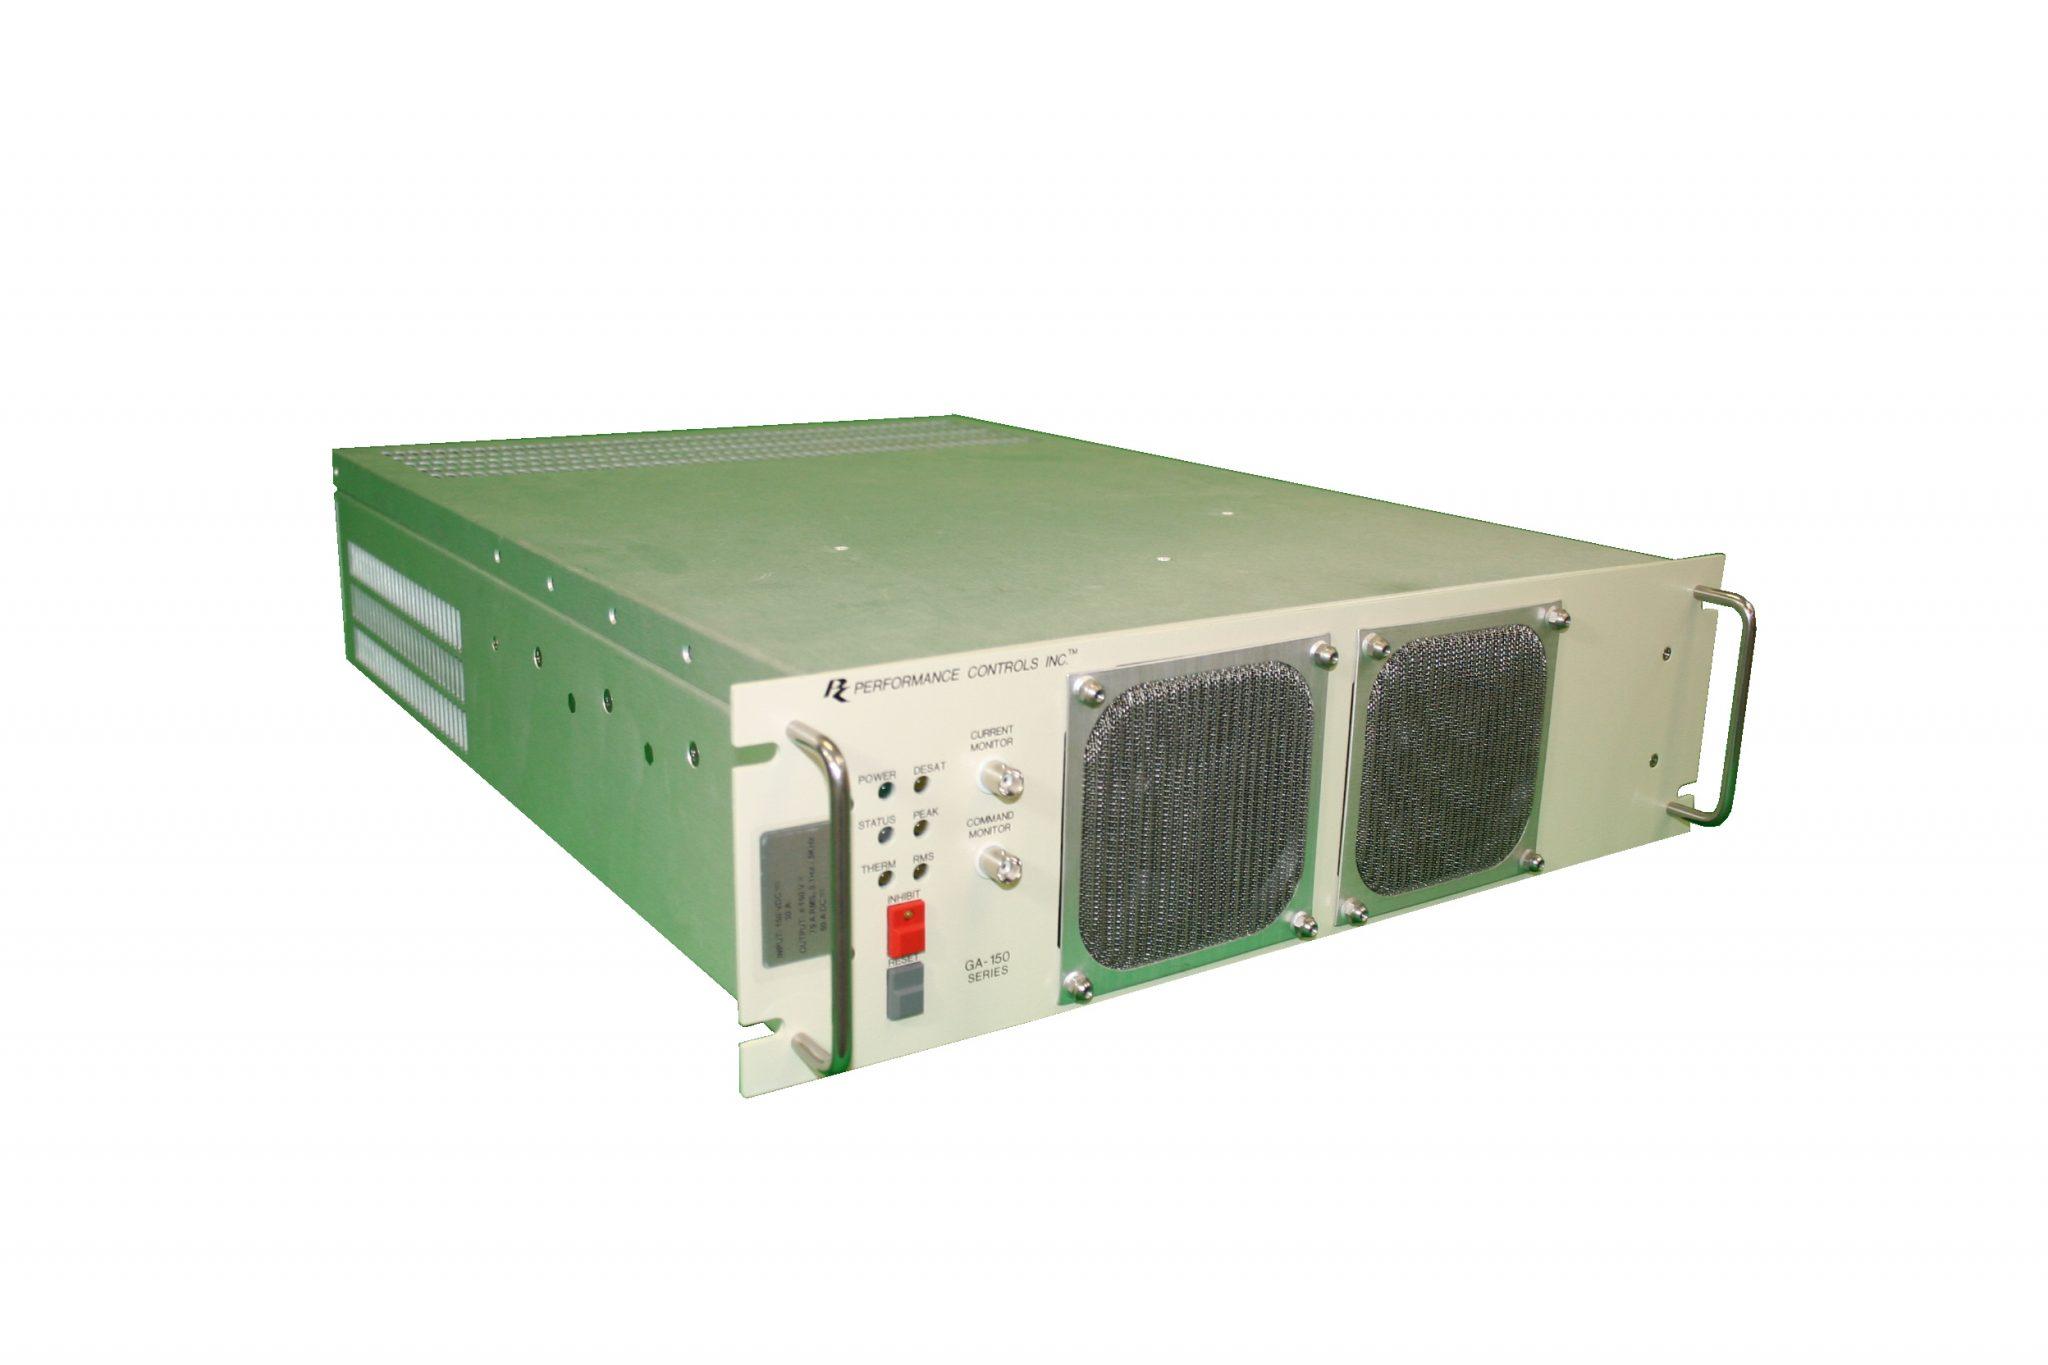 Product: GA-150, 1-Axis Gradient Amplifier (Legacy) - Performance Controls, Inc.